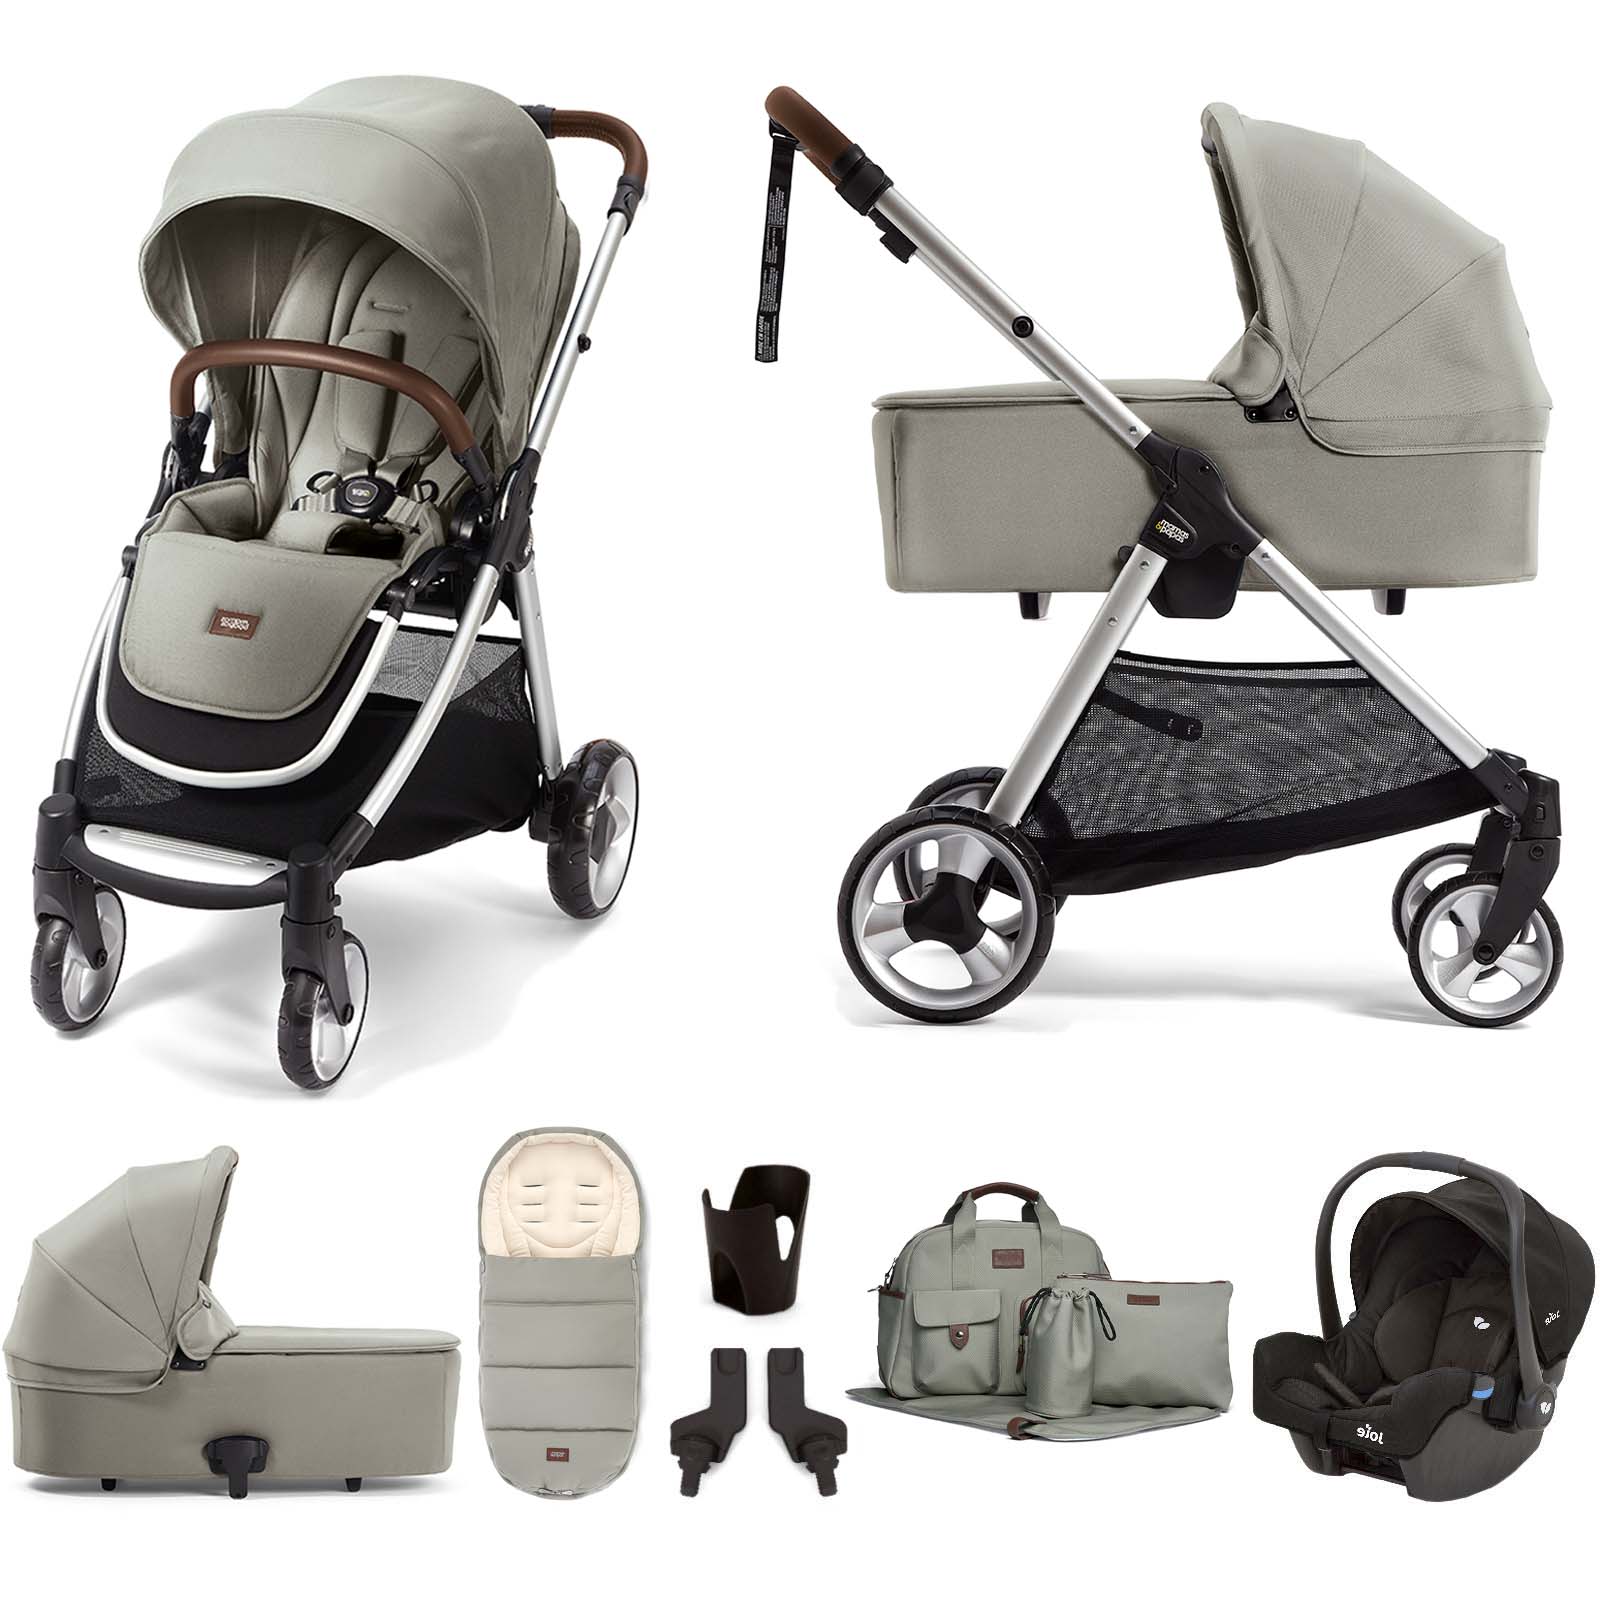 Mamas & Papas Flip XT2 7pc Essentials (Gemm Car Seat) Travel System with Carrycot - Sage Green | Buy at Online4baby